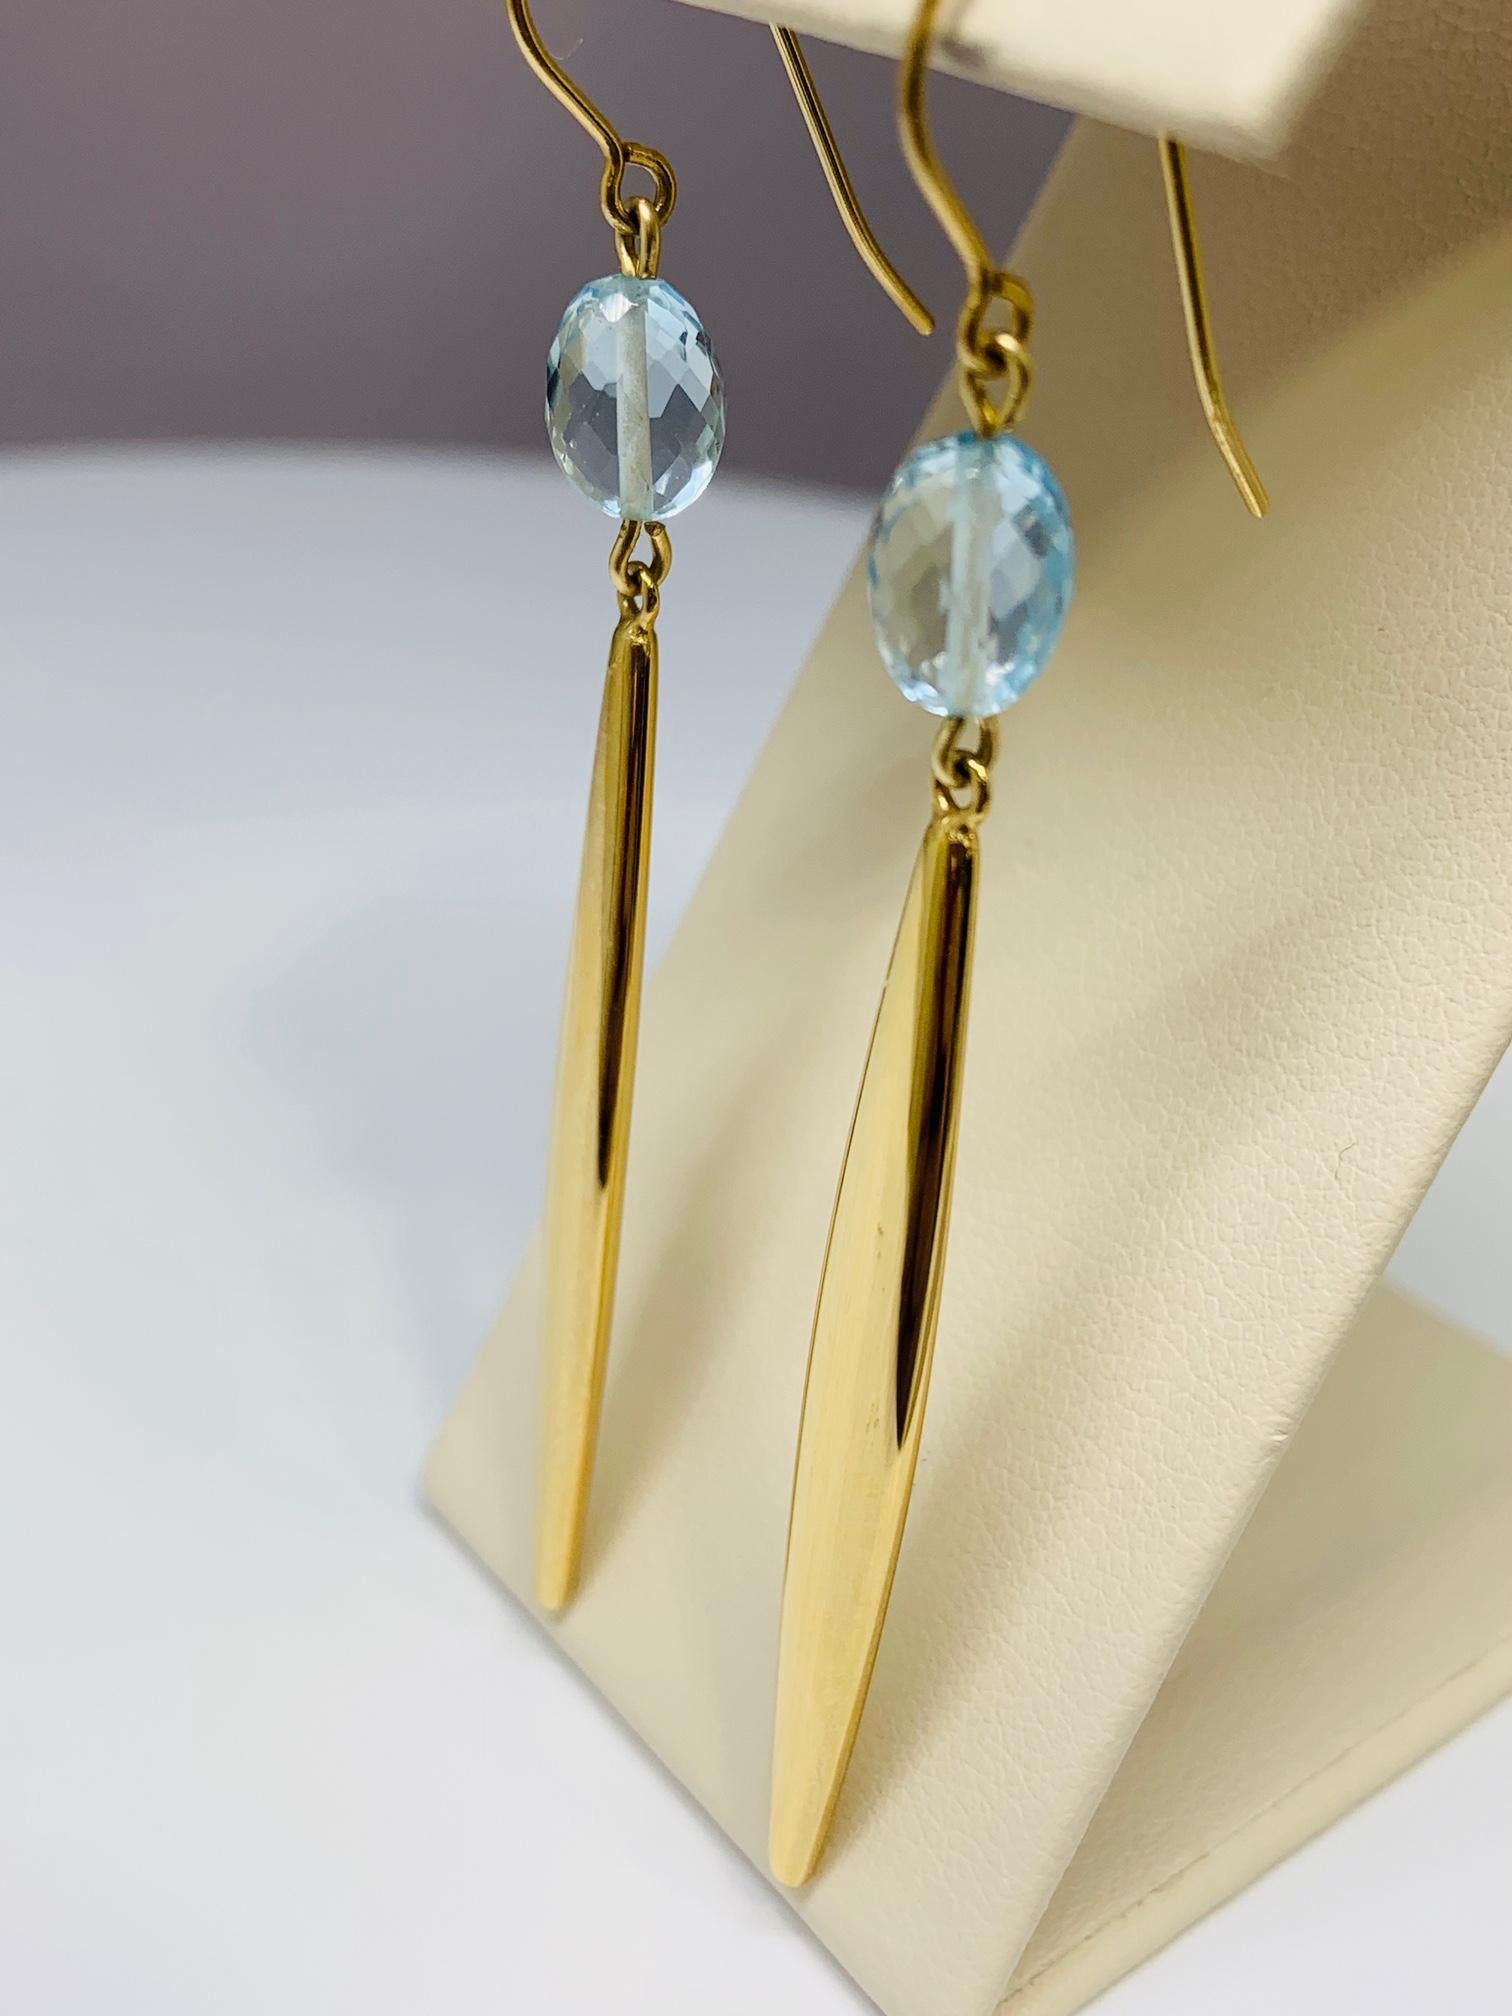 These beautiful drop earrings are made of 14K yellow gold and include two 8 x 5 millimeter elongated oval blue topaz stones! The blue topaz are faceted for extra sparkle and dimension. These earrings drop approximately 2.5 inches down from the